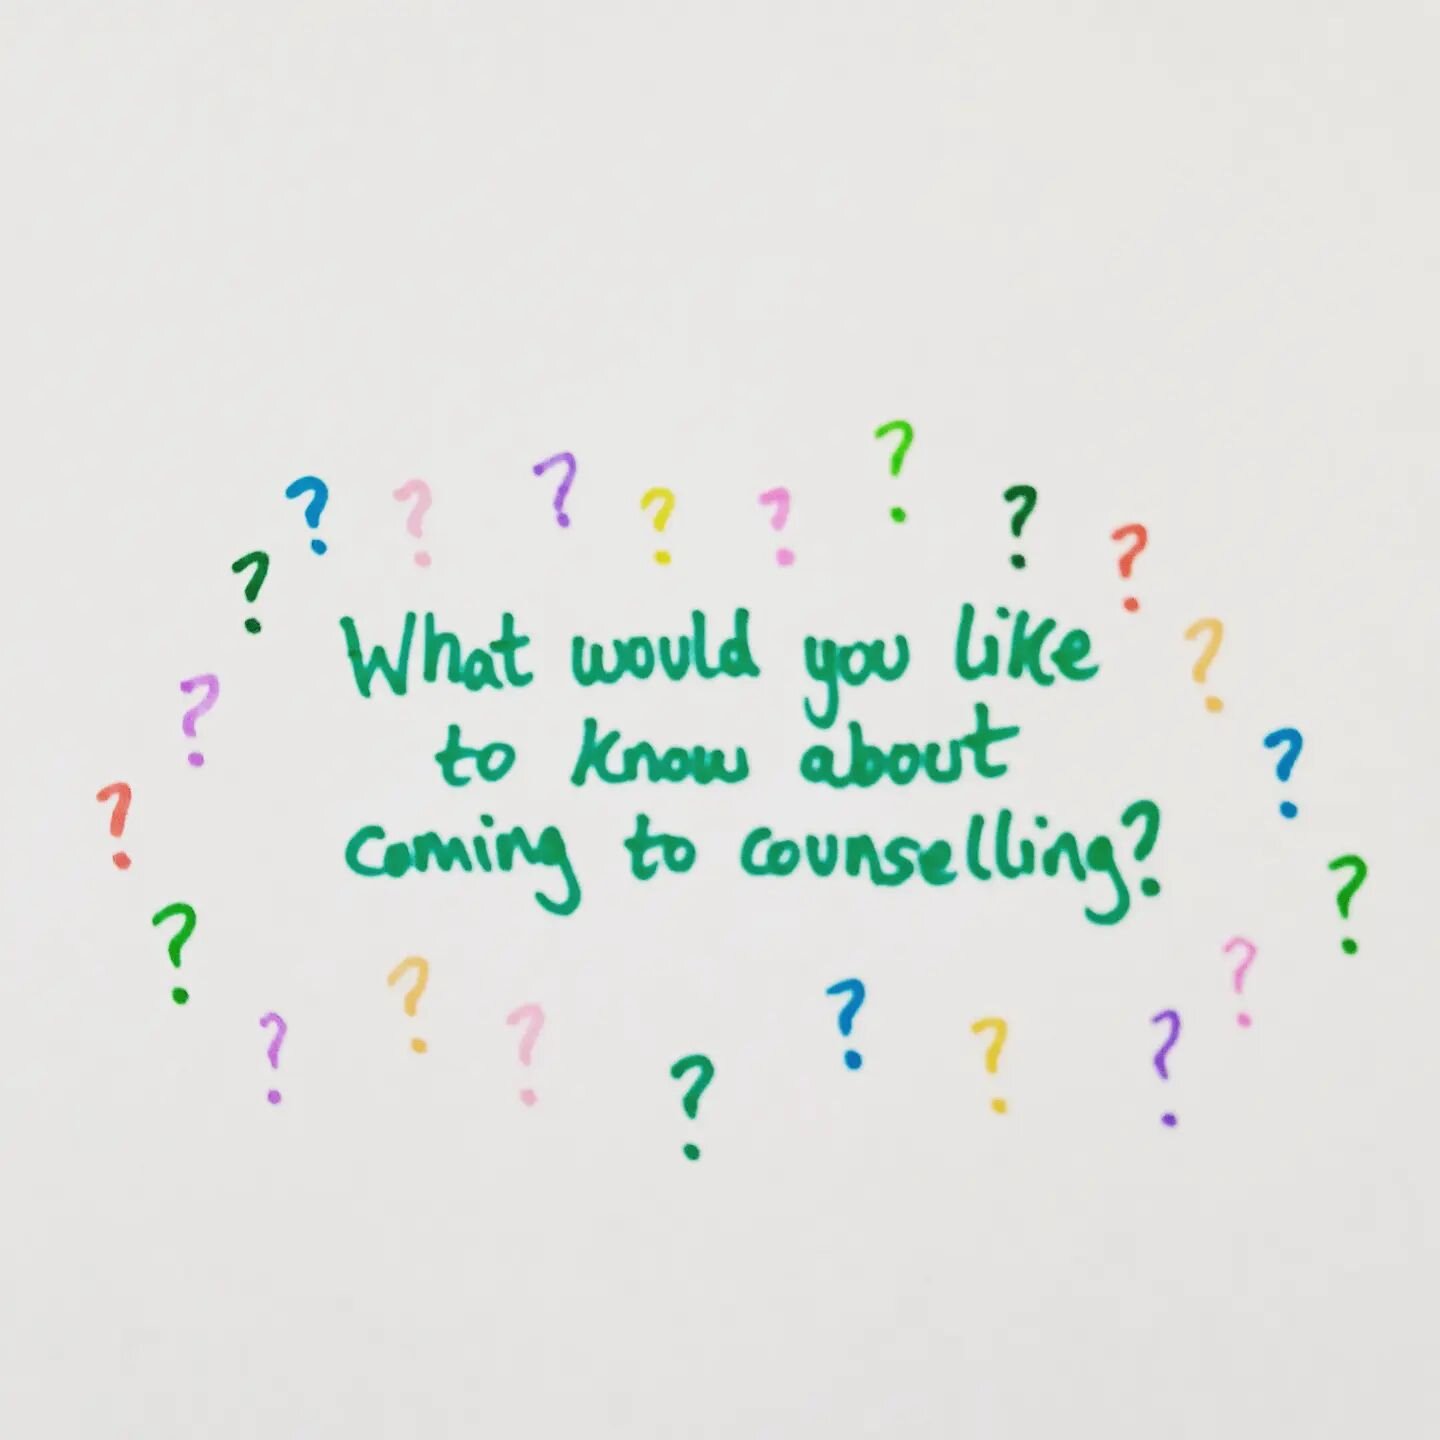 What do you want to know about coming to therapy?
 
I'm developing some FAQs for my website for folks to find some of the answers they need about counselling. 

The idea of having counselling can be a daunting prospect, even if you know it is somethi